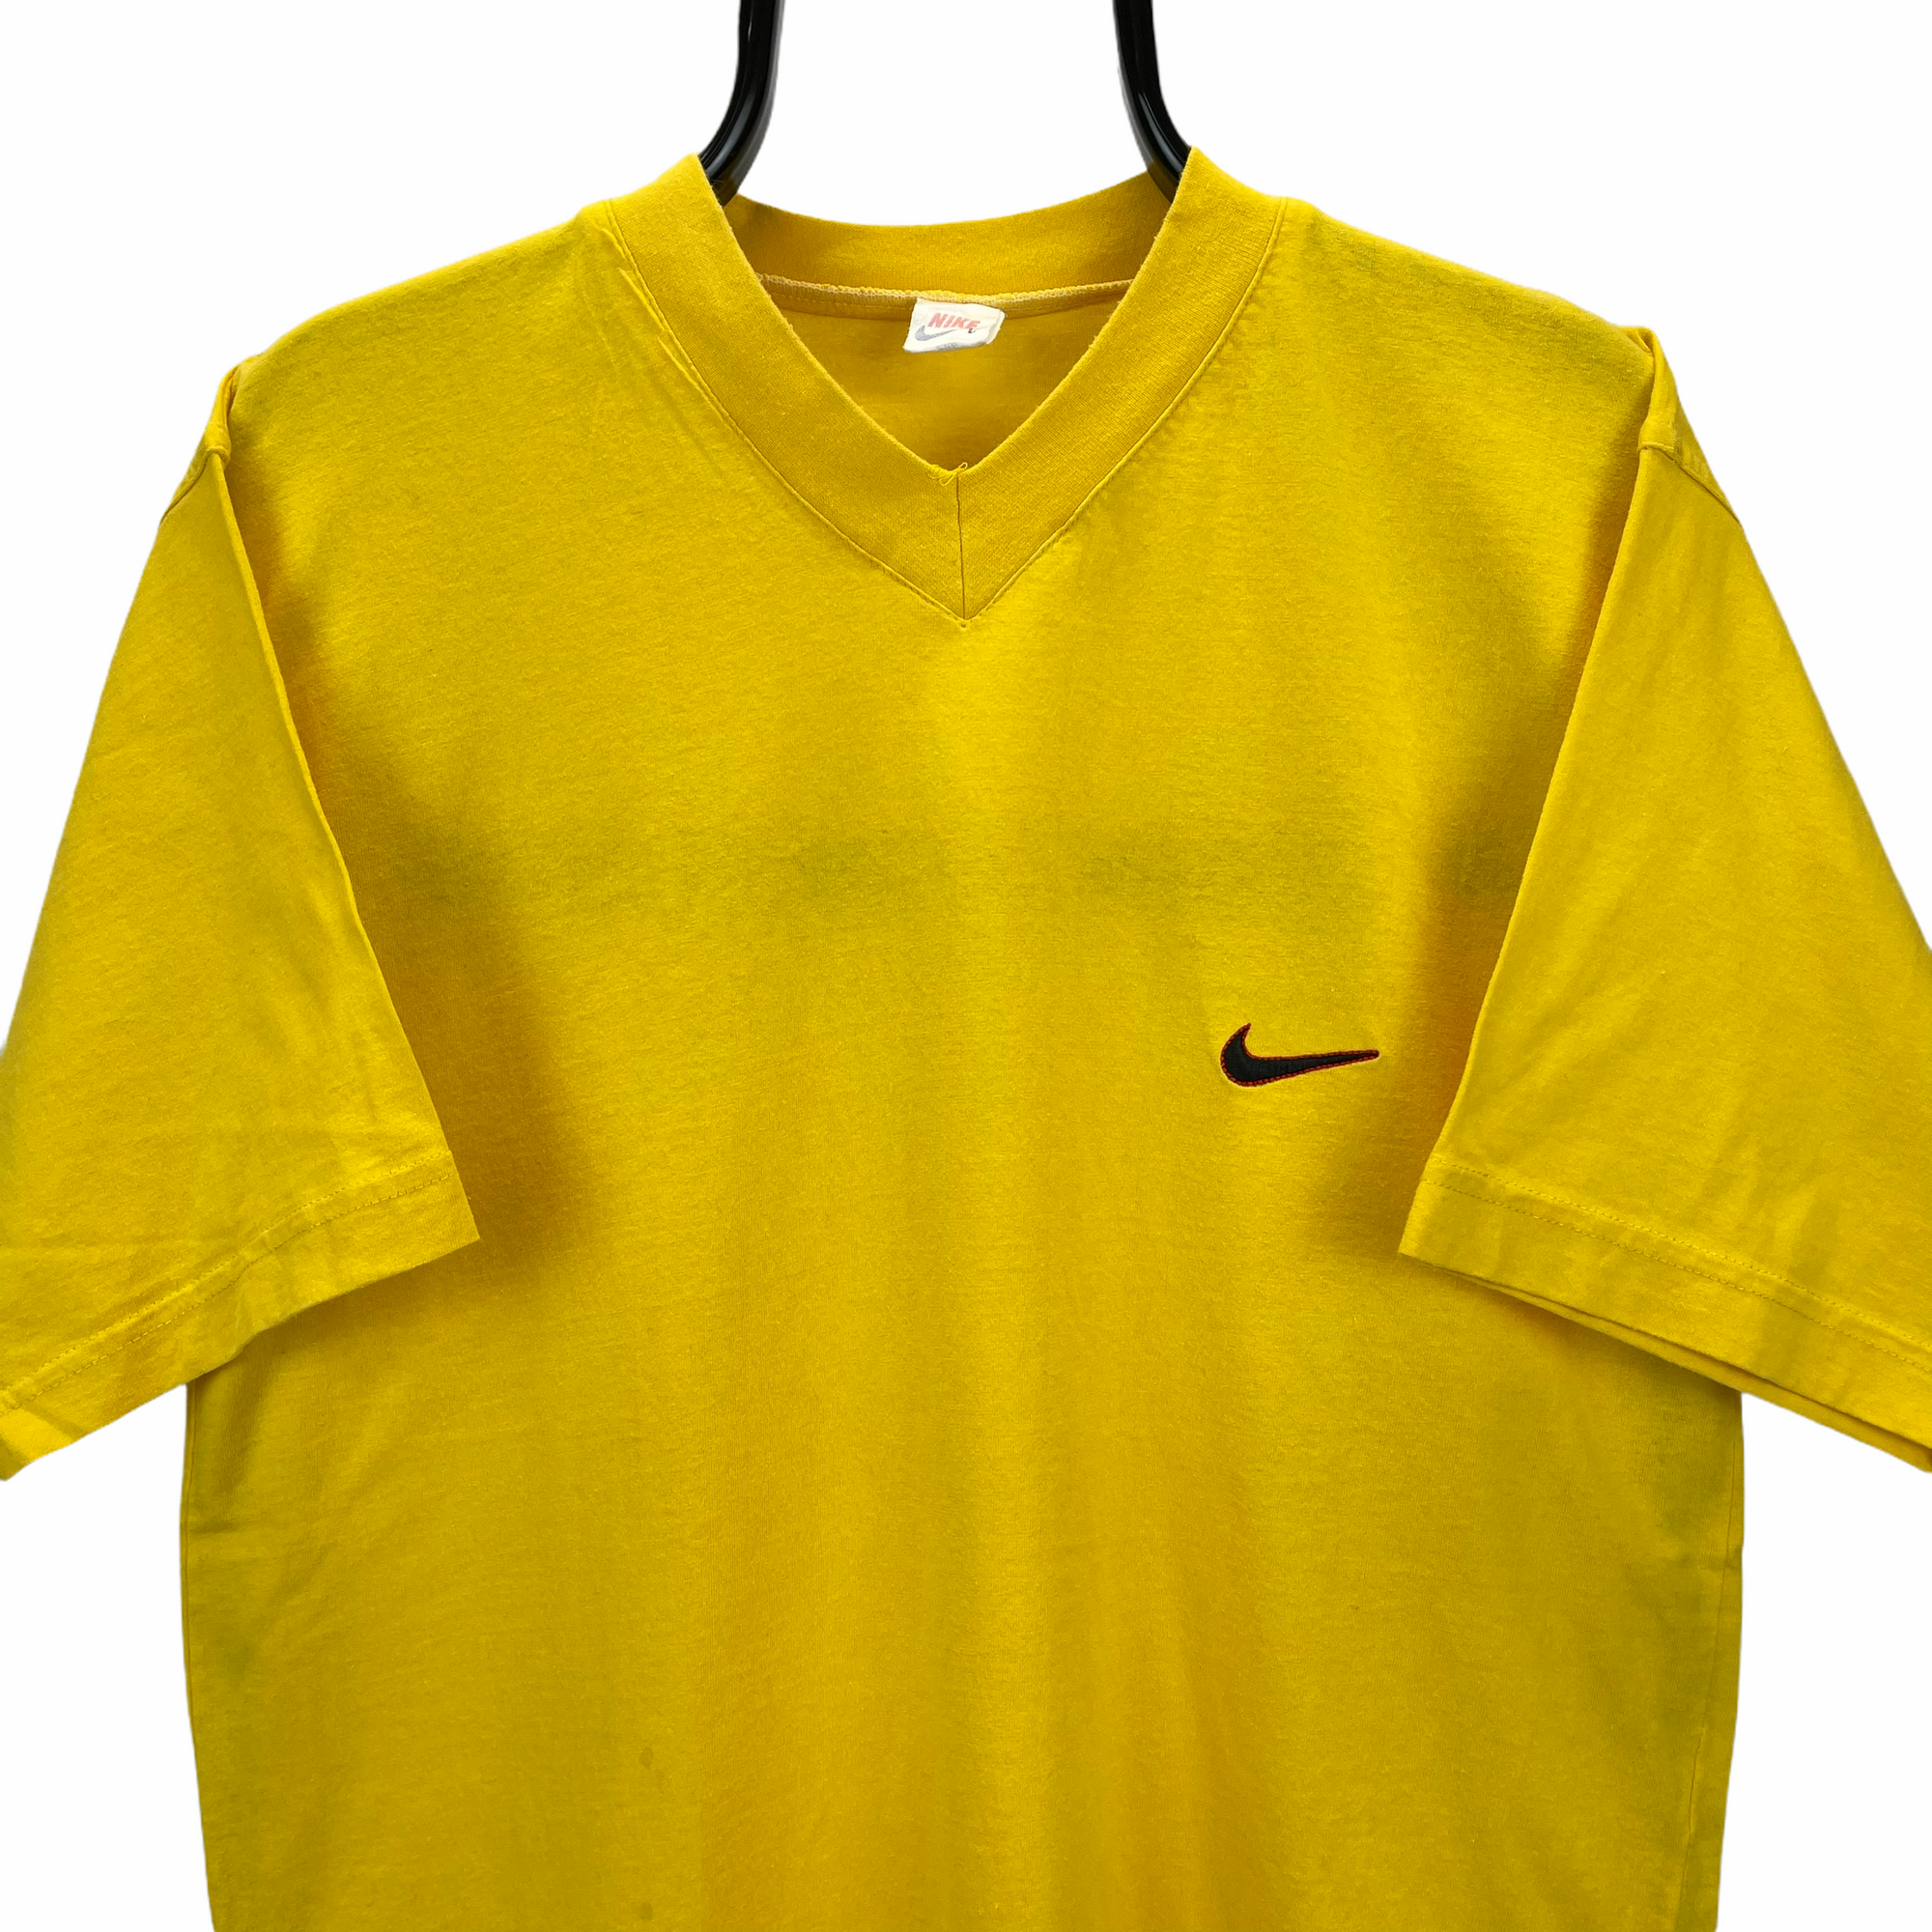 VINTAGE 90S NIKE EMBROIDERED SMALL SWOOSH TEE IN YELLOW - MEN'S LARGE/WOMEN'S XL